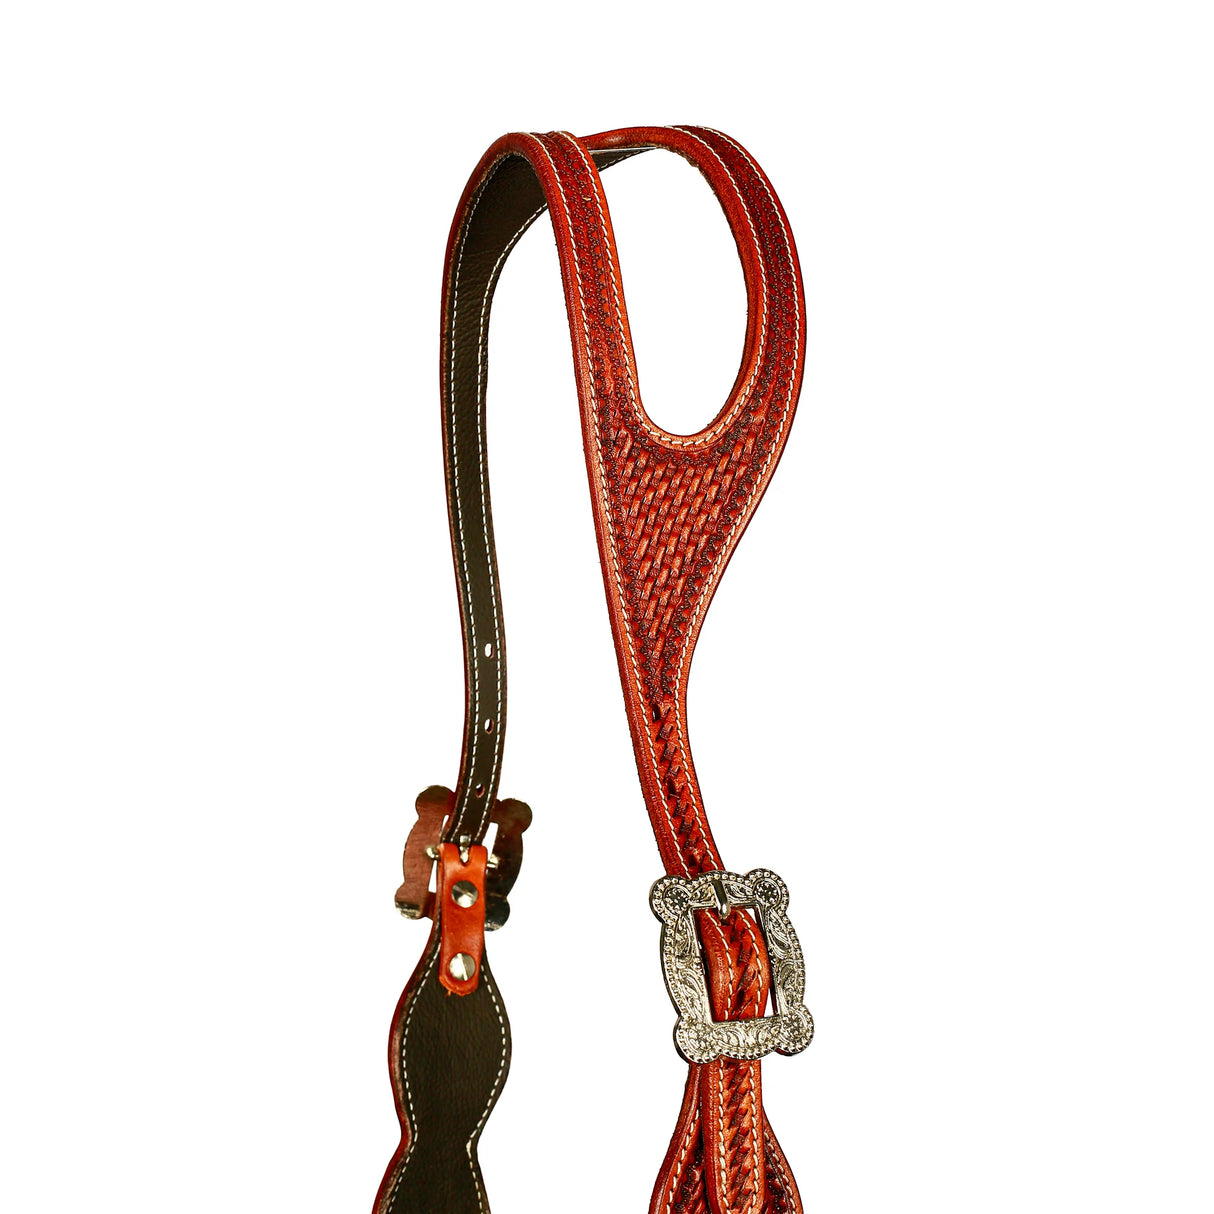 Syd Hill Tenison Headstall